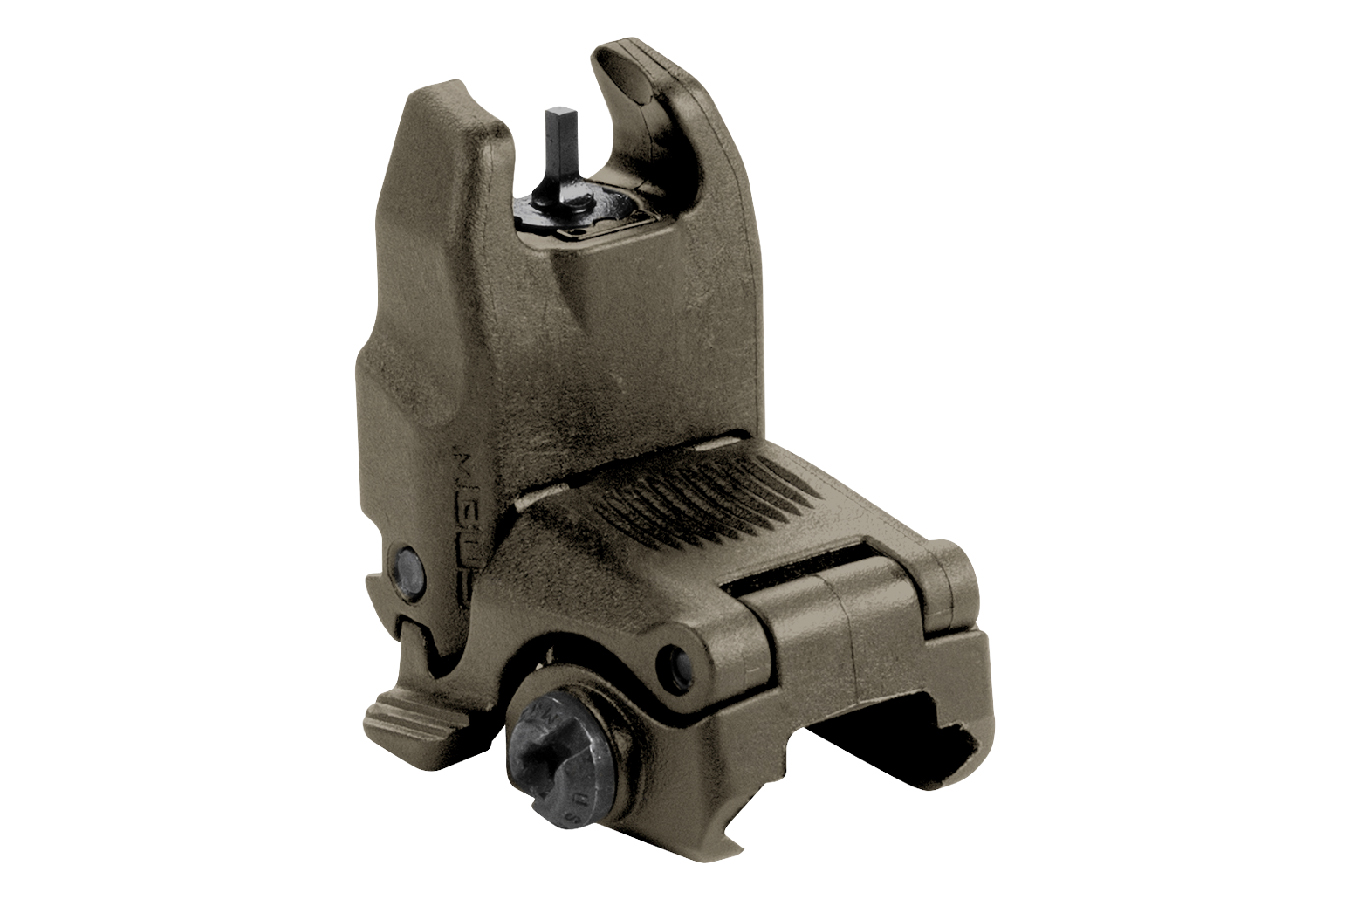 MBUS FRONT BACK-UP SIGHT GEN 2 (OD GREEN)